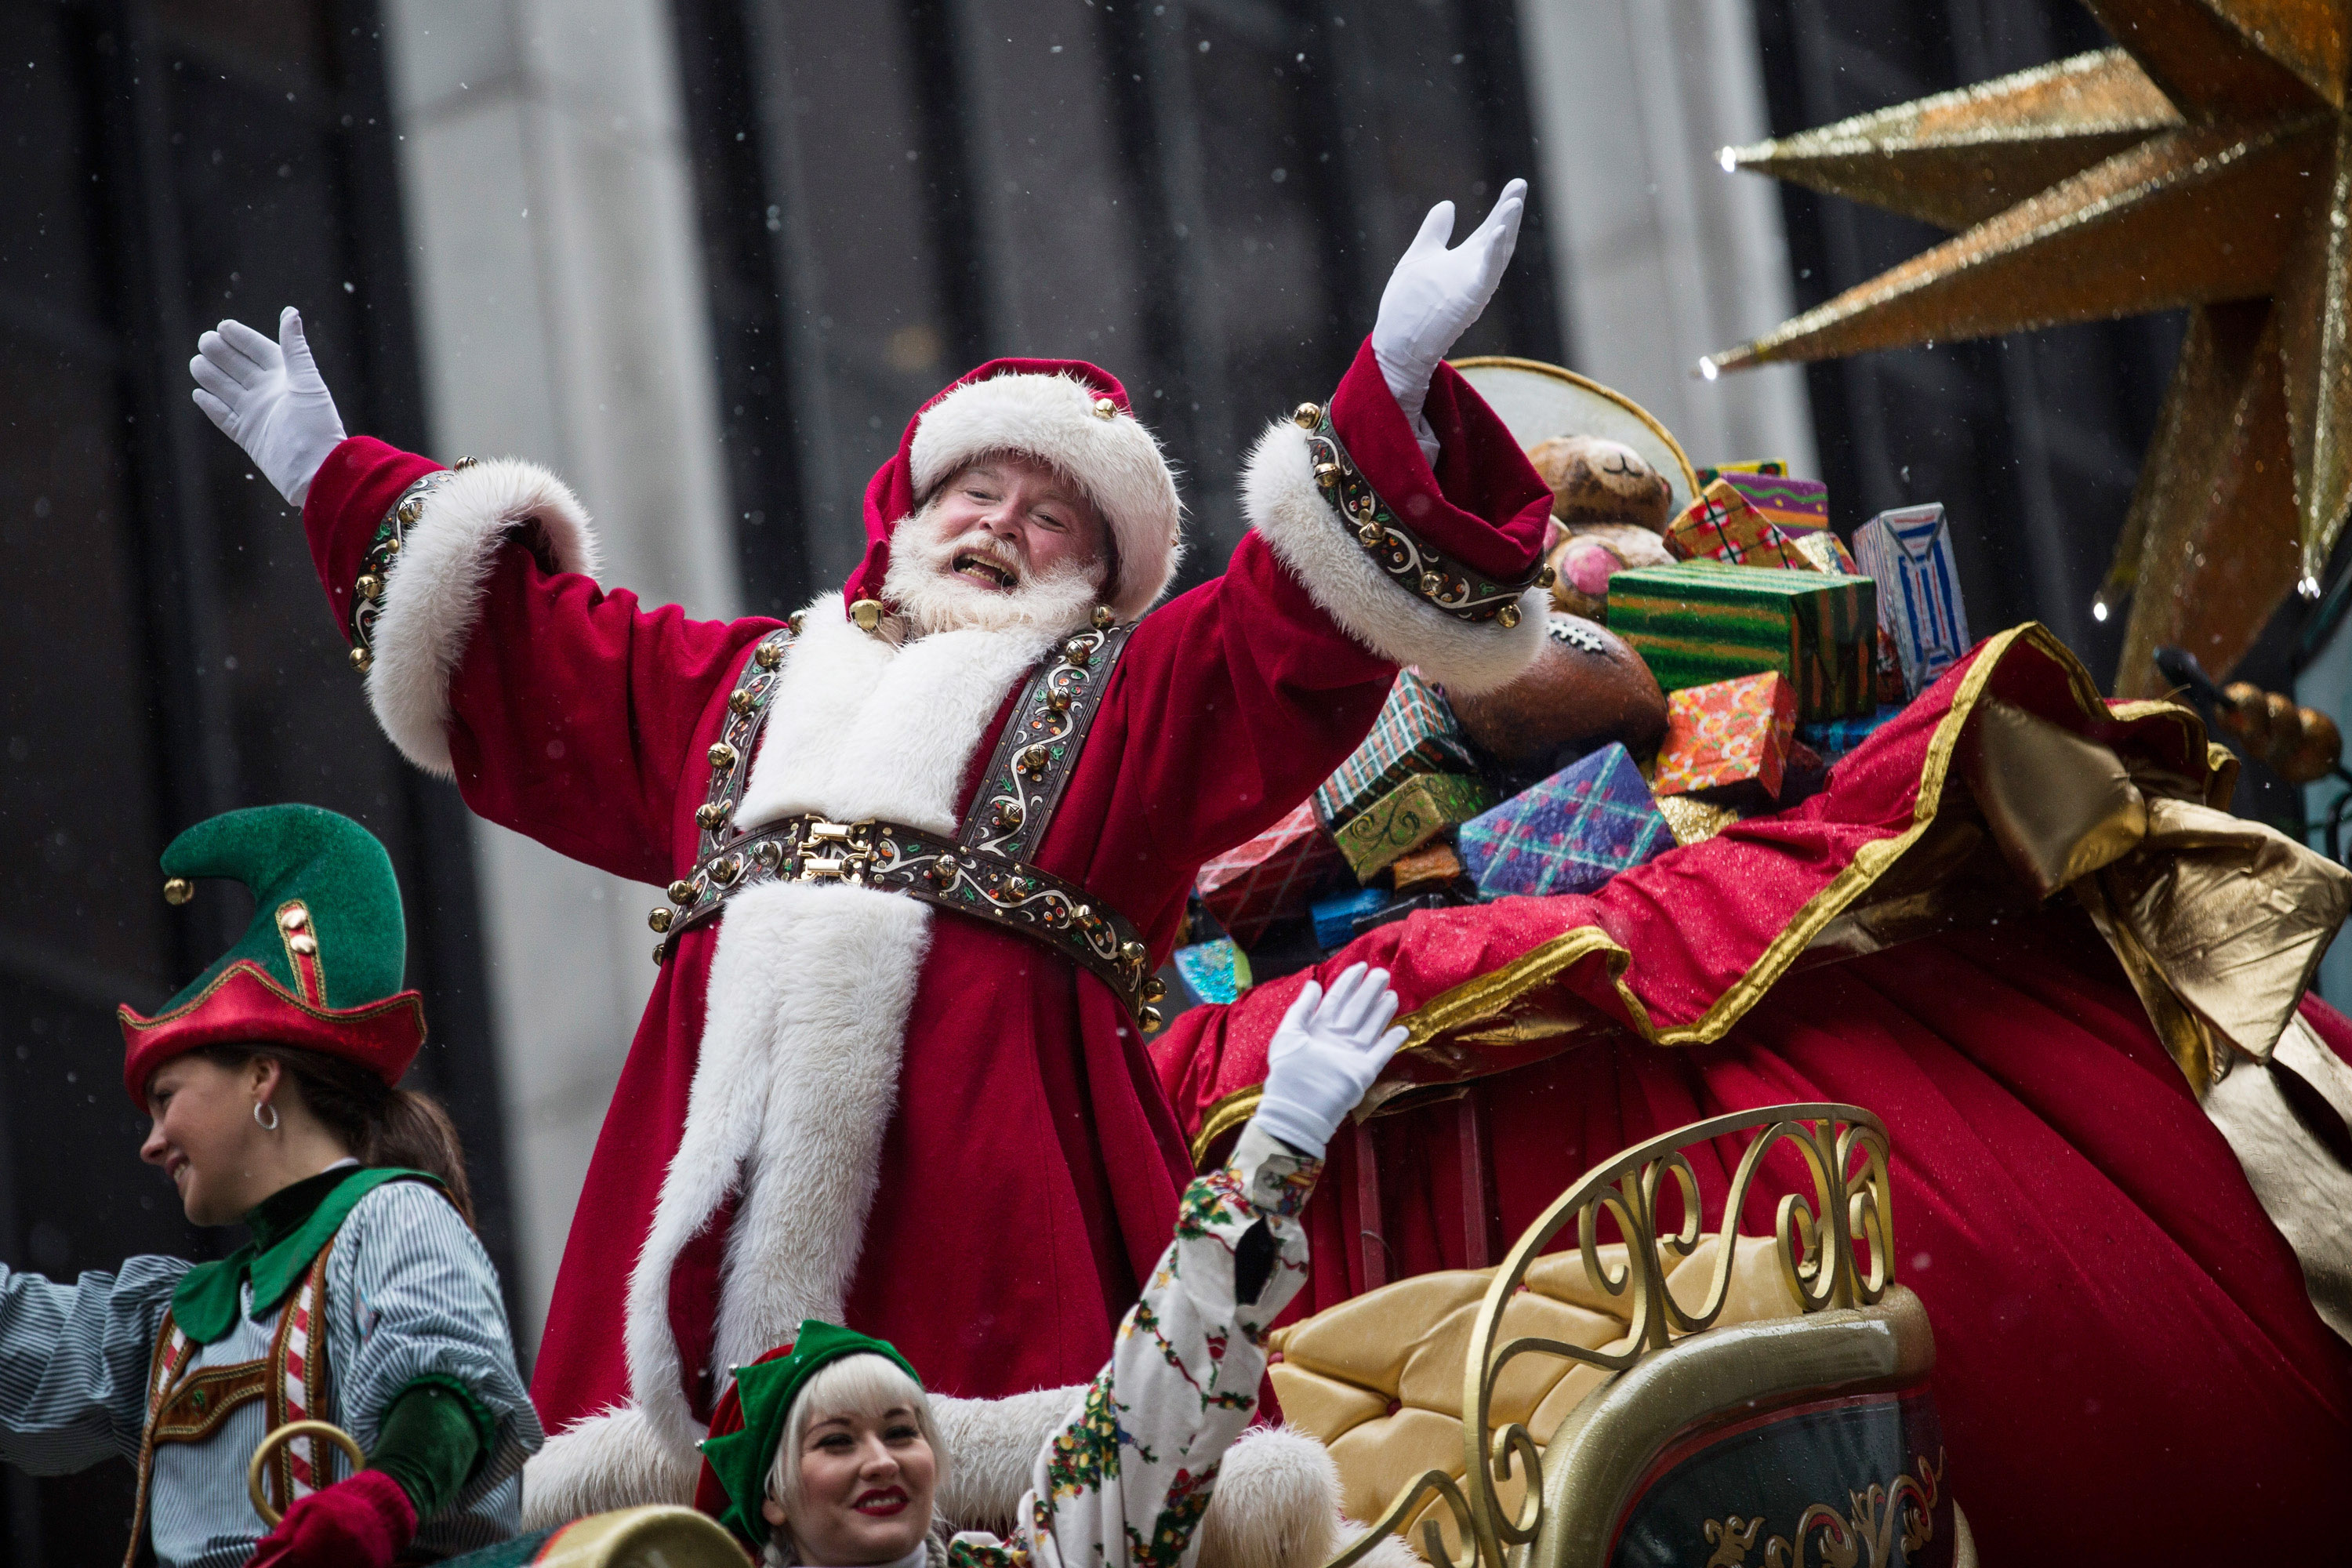 Santa Claus waves to the crowd during the Macy's Thanksgiving Day Parade on November 27, 2014 in New York City. (Andrew Burton&mdash;Getty Images)